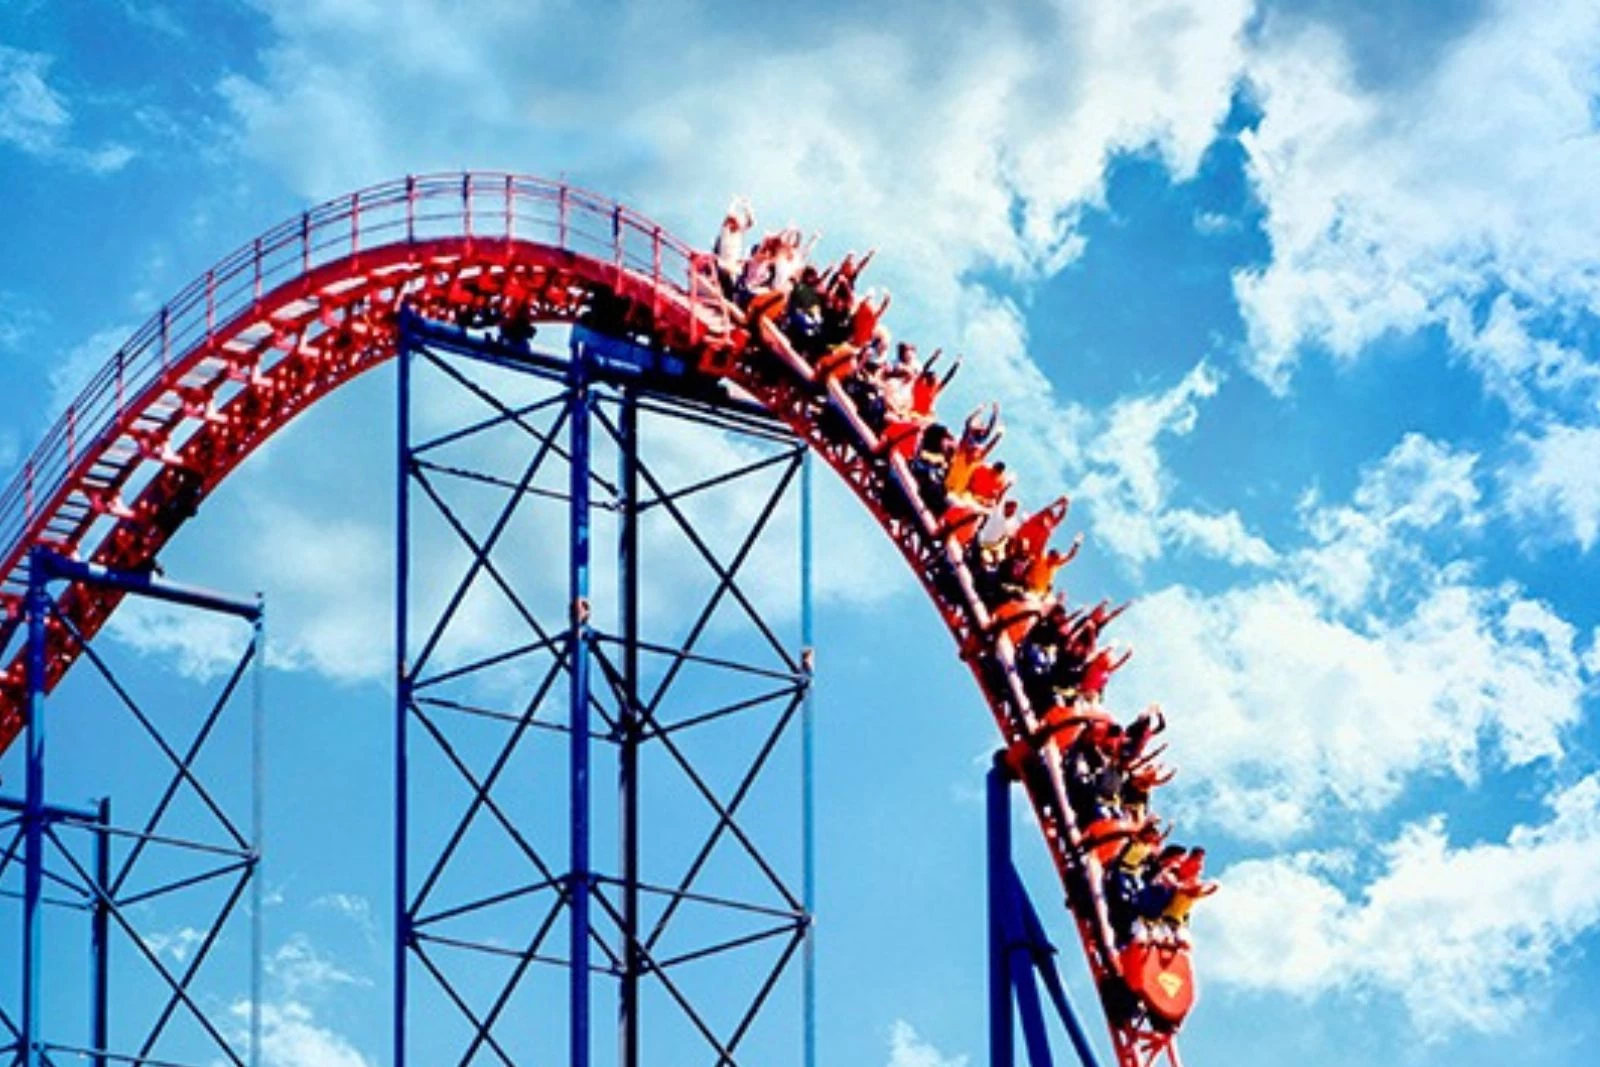 5 Exciting Things at Six Flags New England This Spring in MA